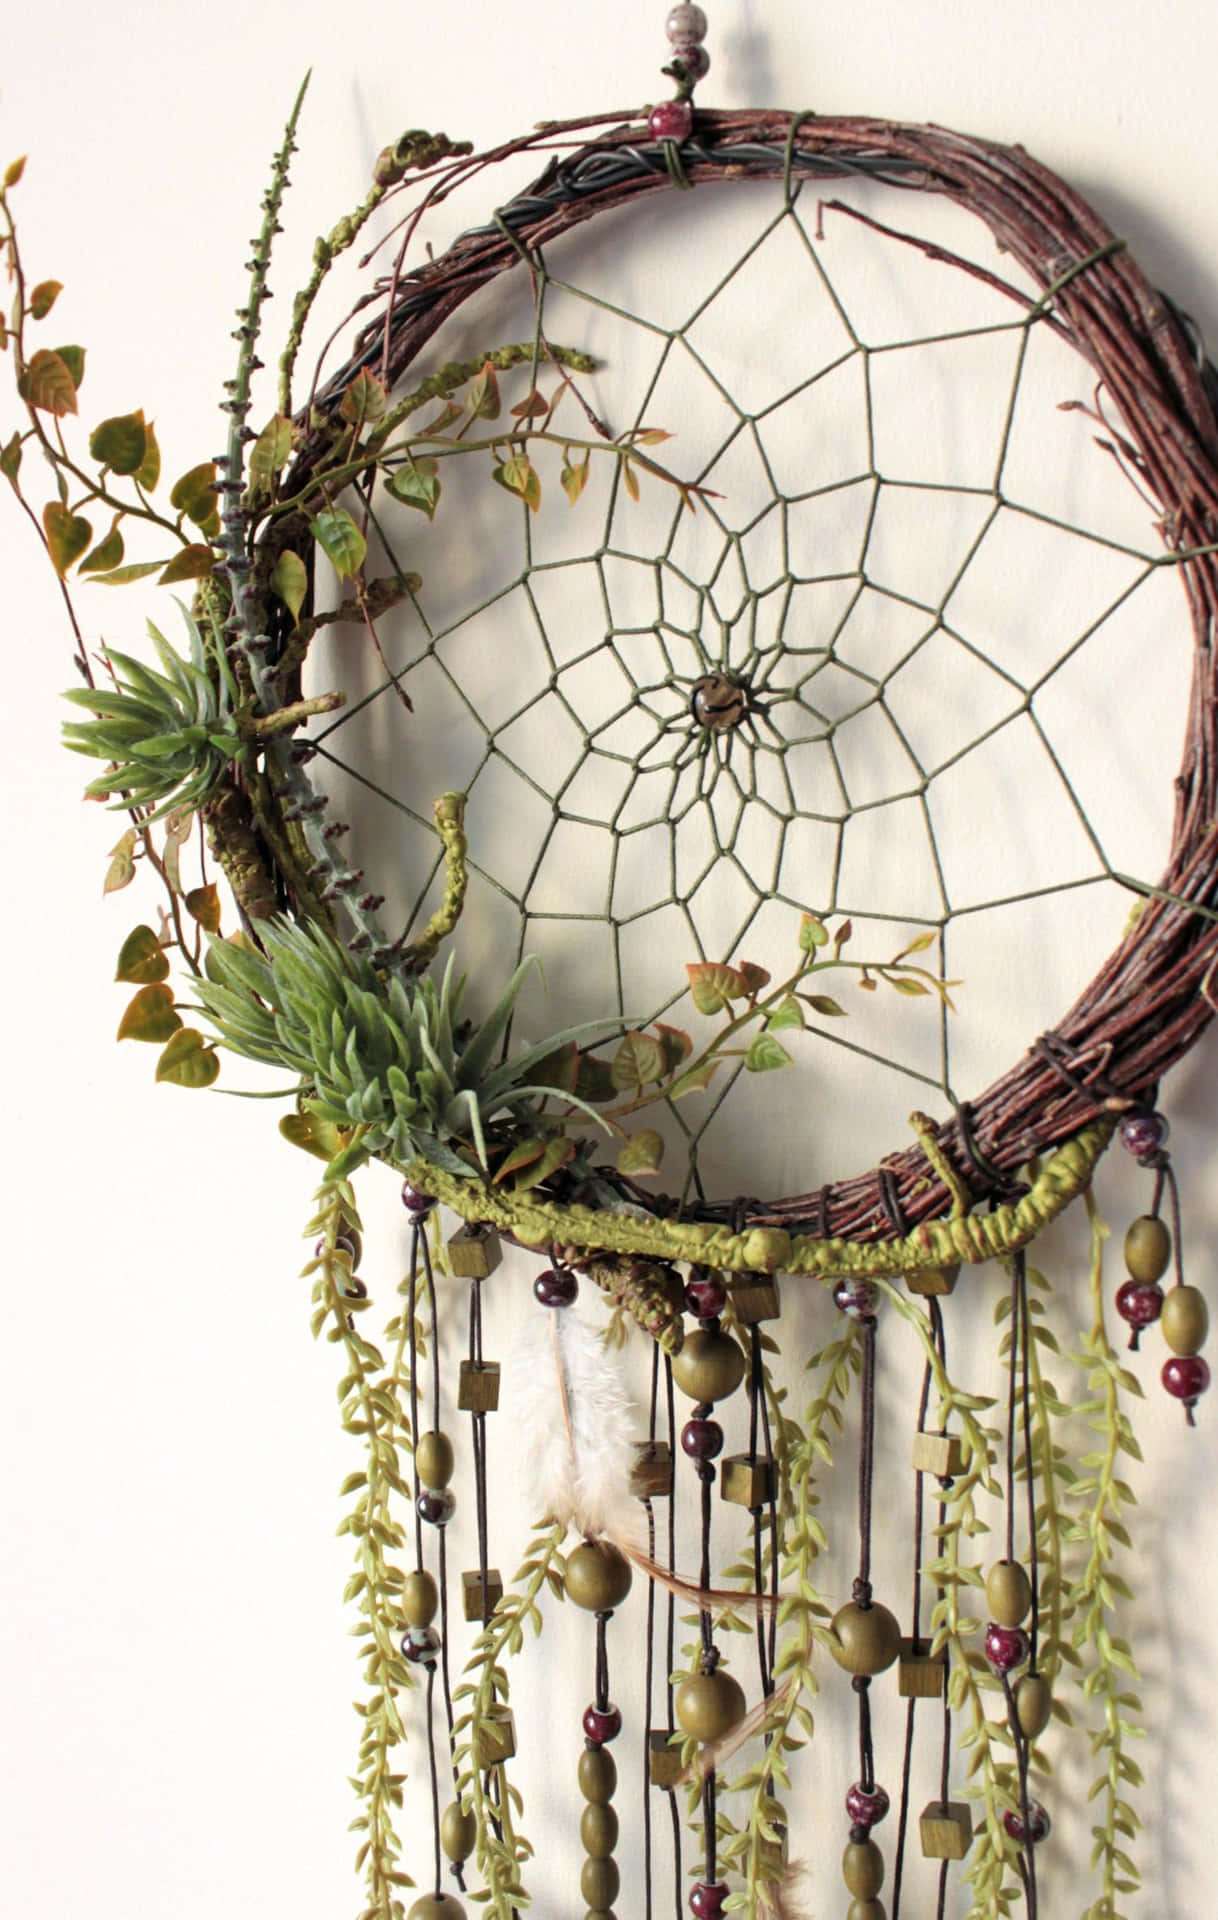 Brighten up your day with a dream catcher!